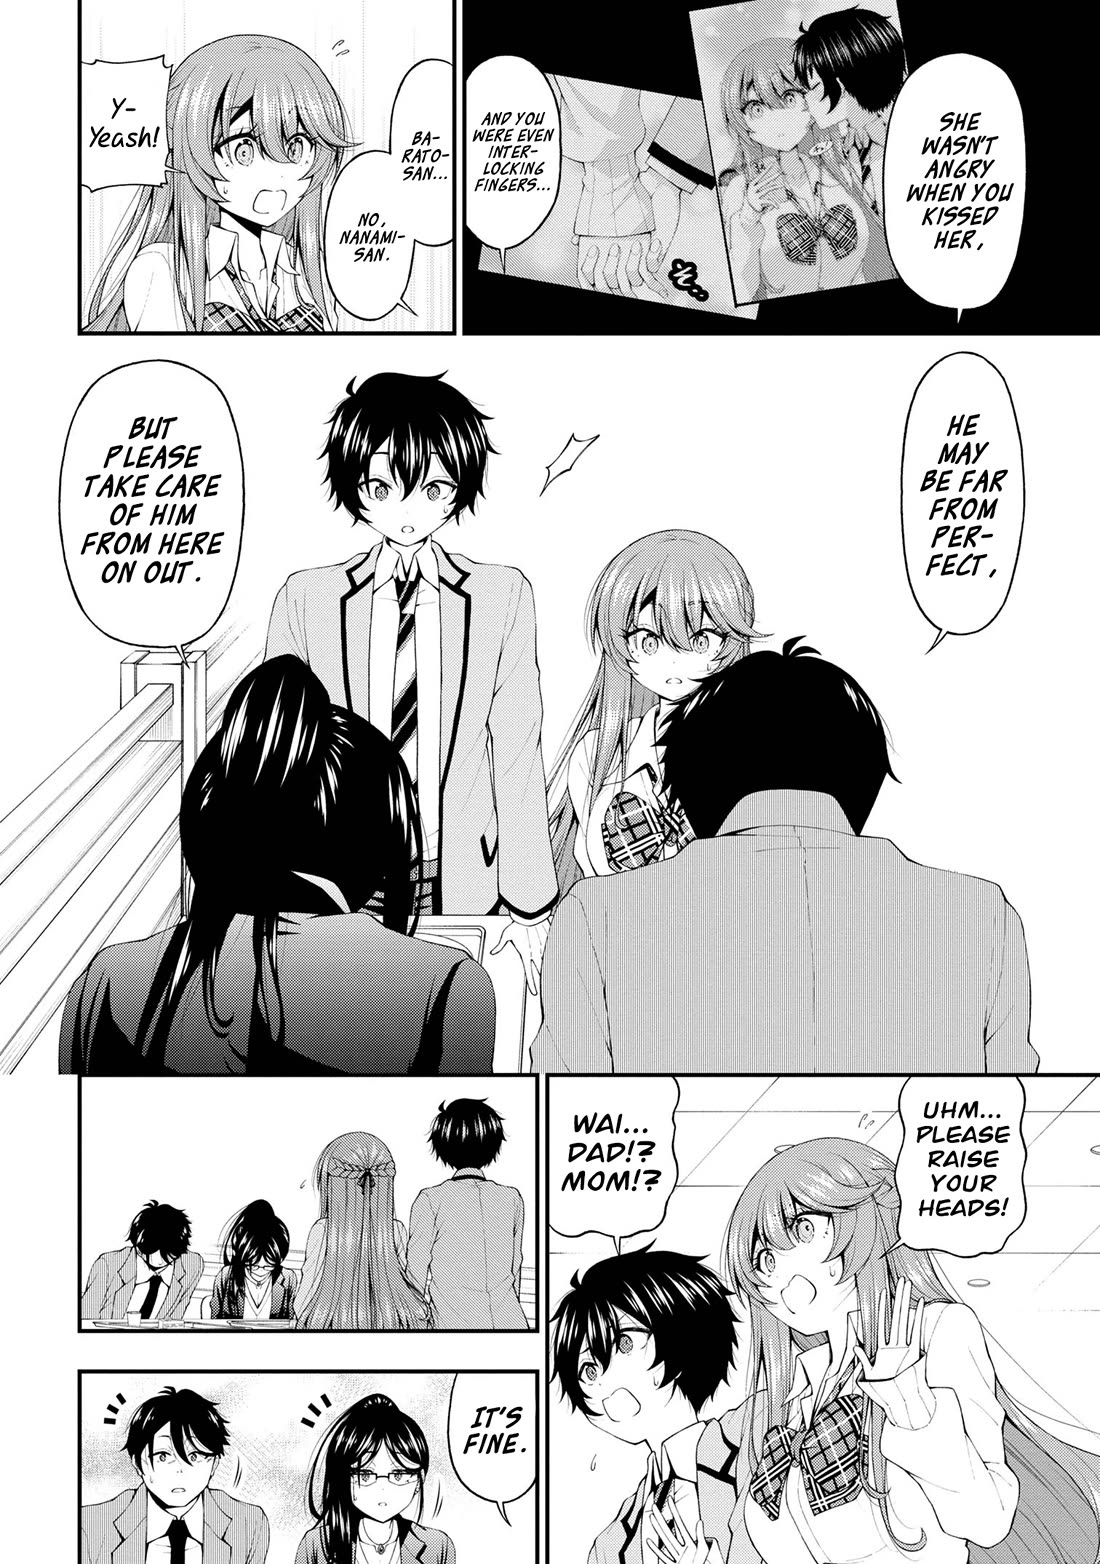 The Gal Who Was Meant to Confess to Me as a Game Punishment - chapter 15 - #4